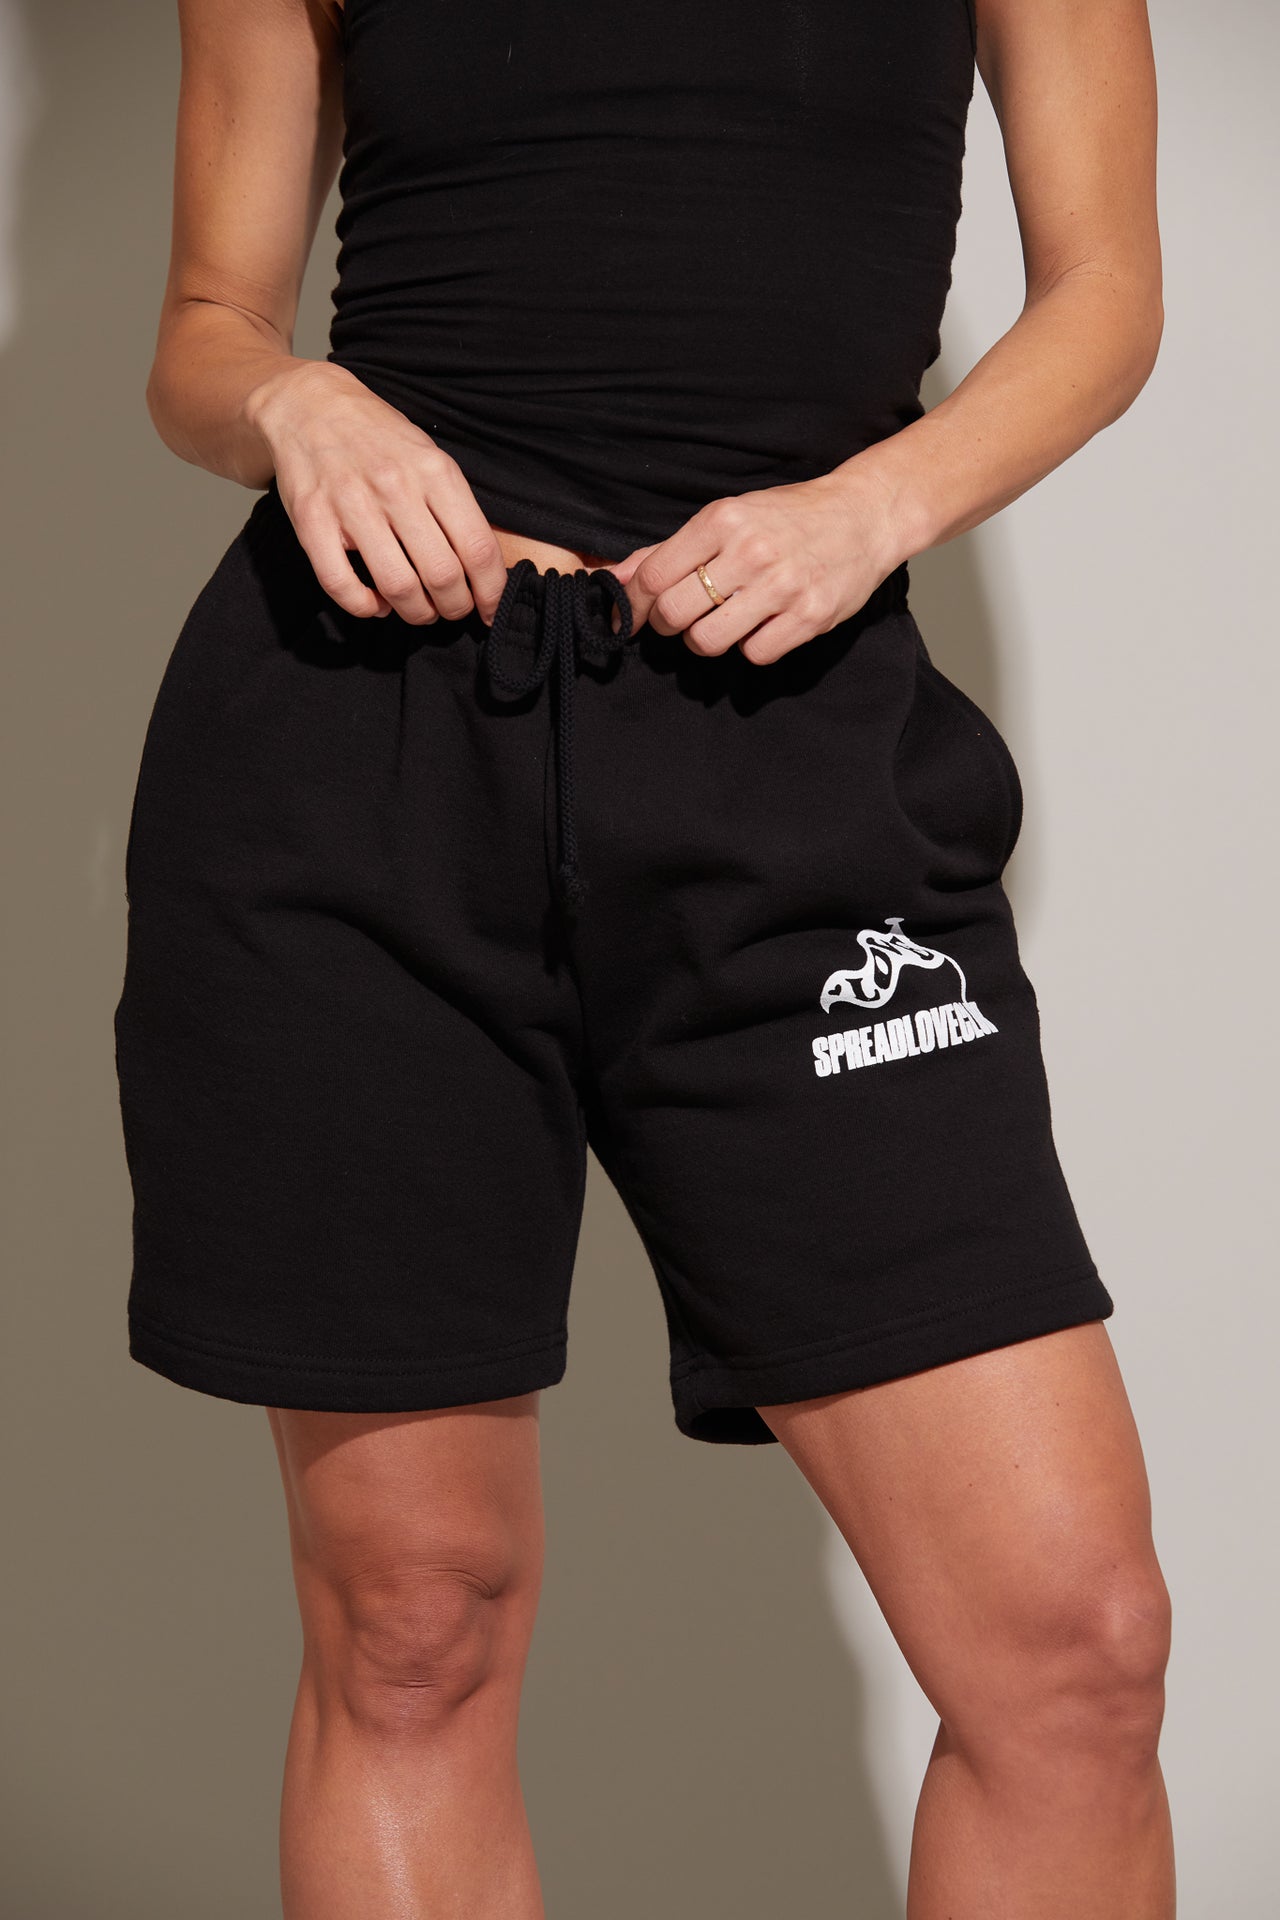 Founders Shorts